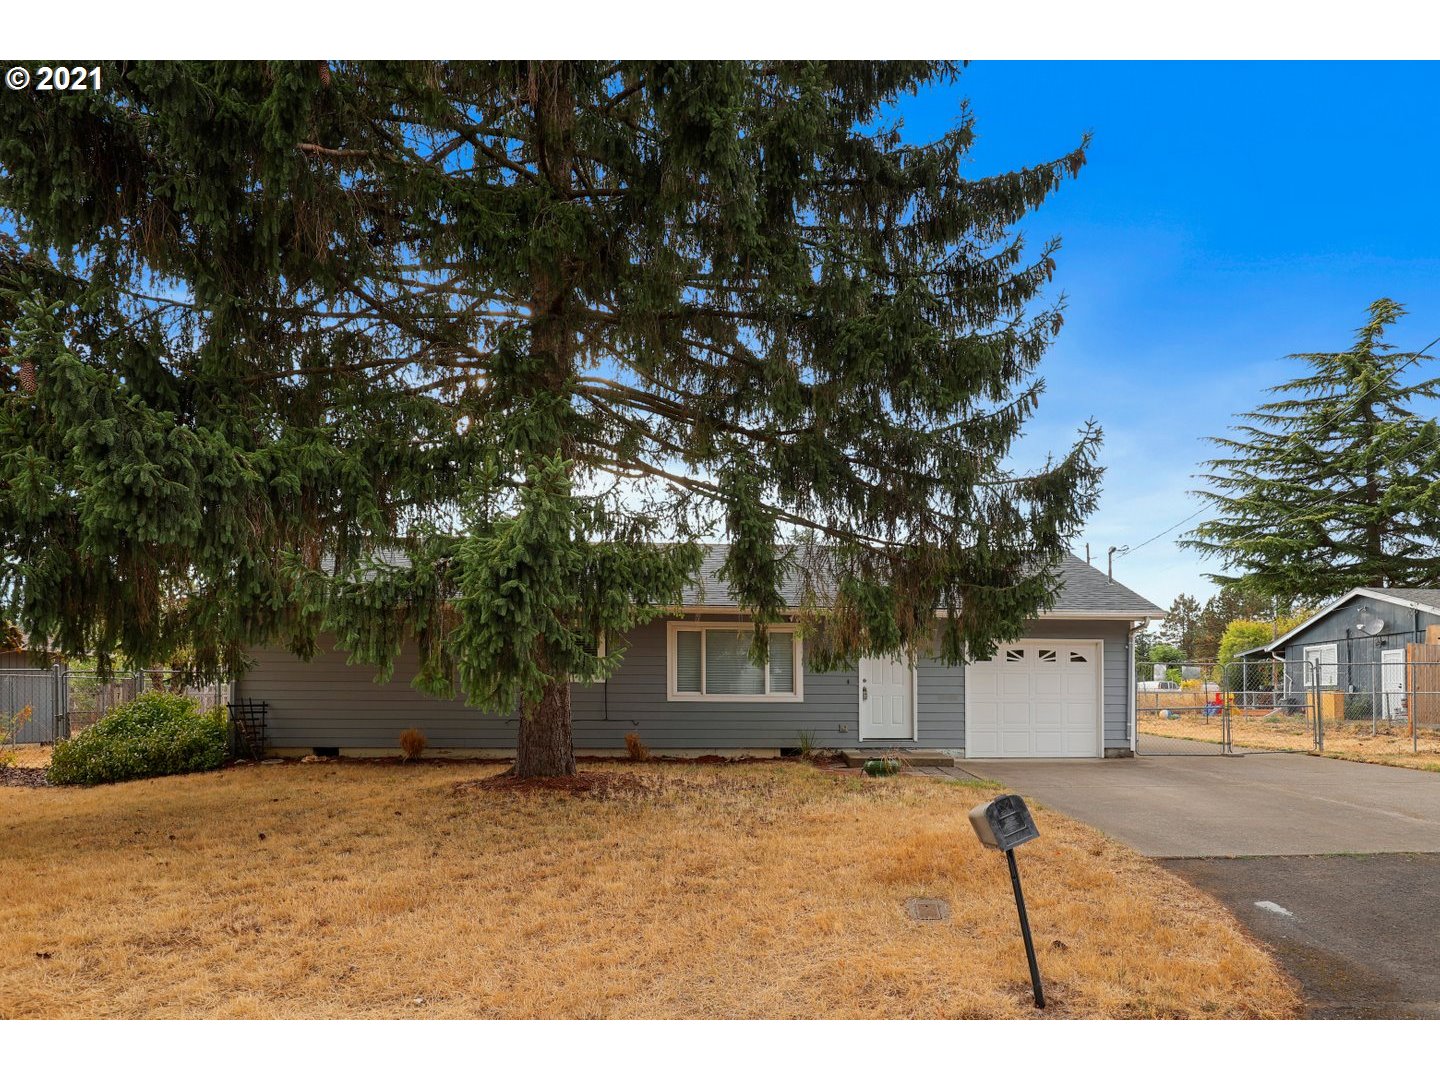 4531 SE 118TH AVE (1 of 21)